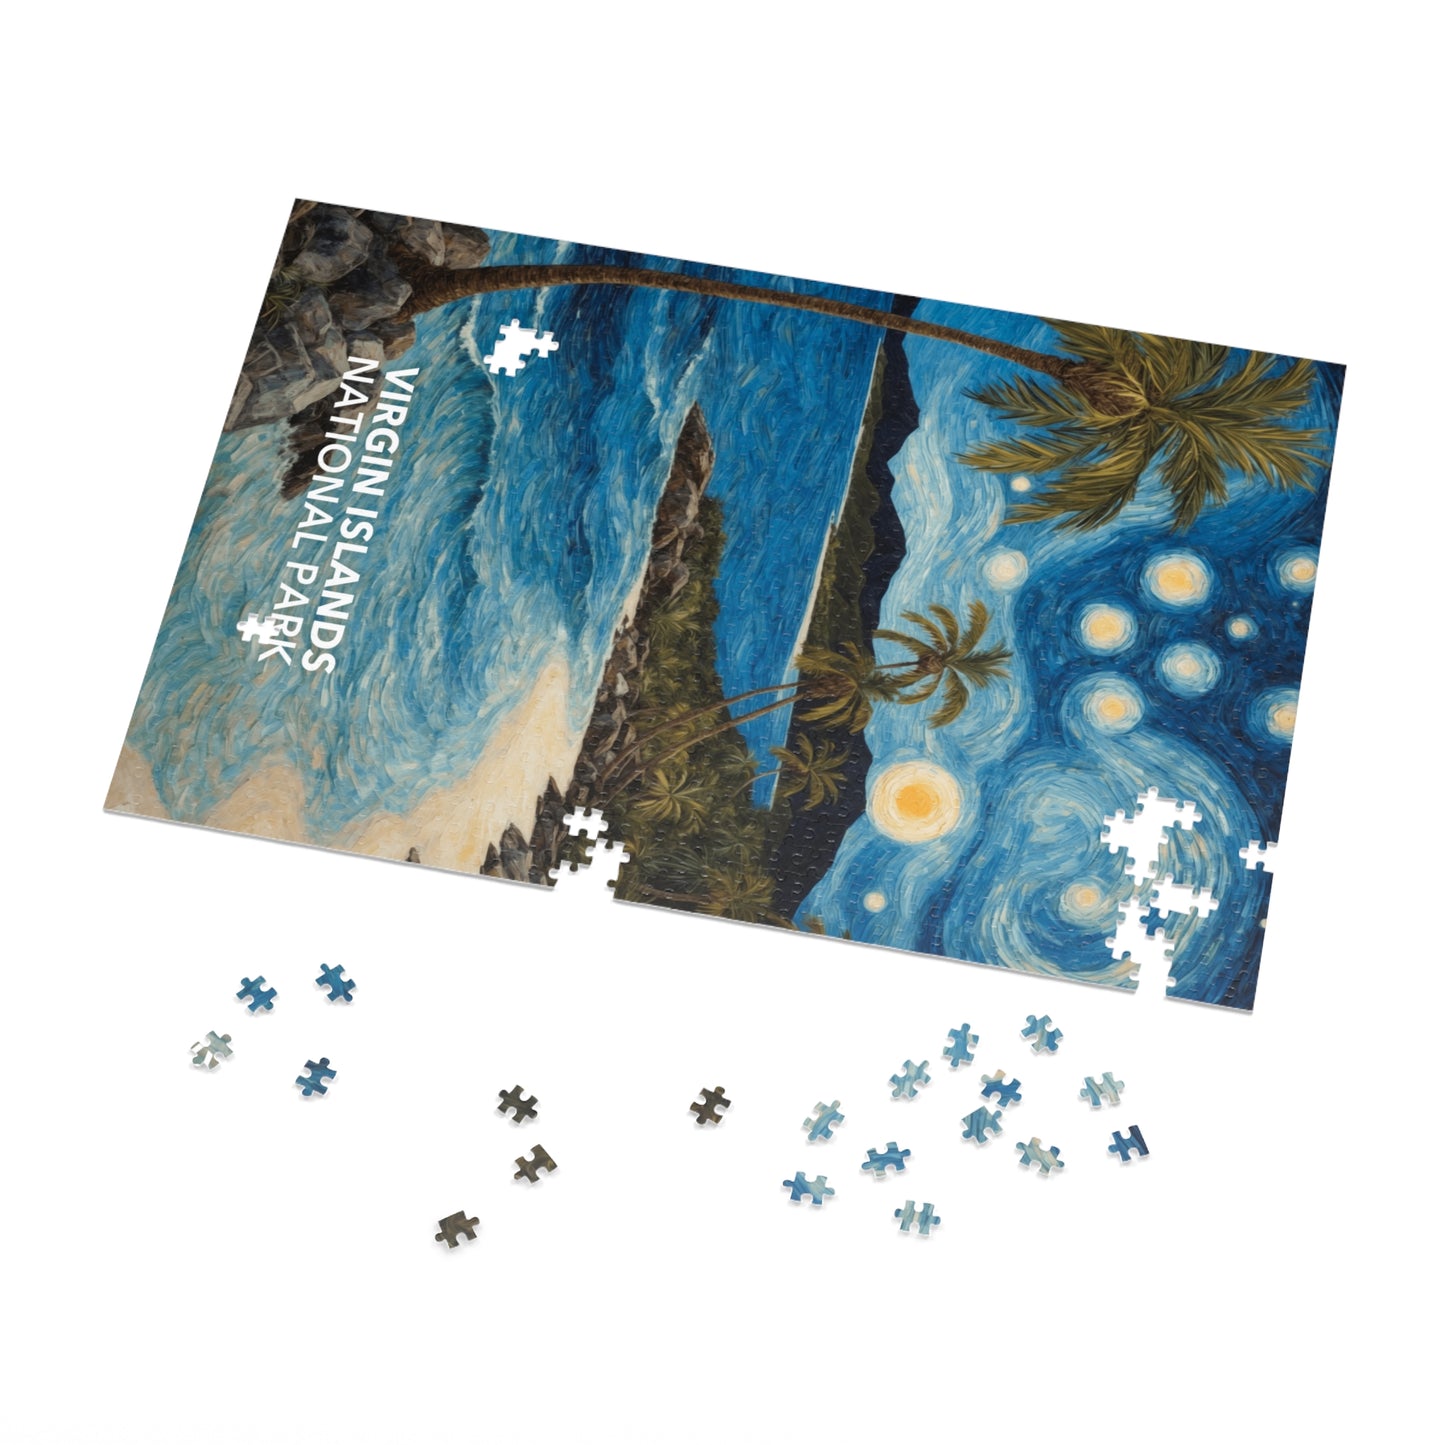 Virgin Islands National Park Jigsaw Puzzle - The Starry Night